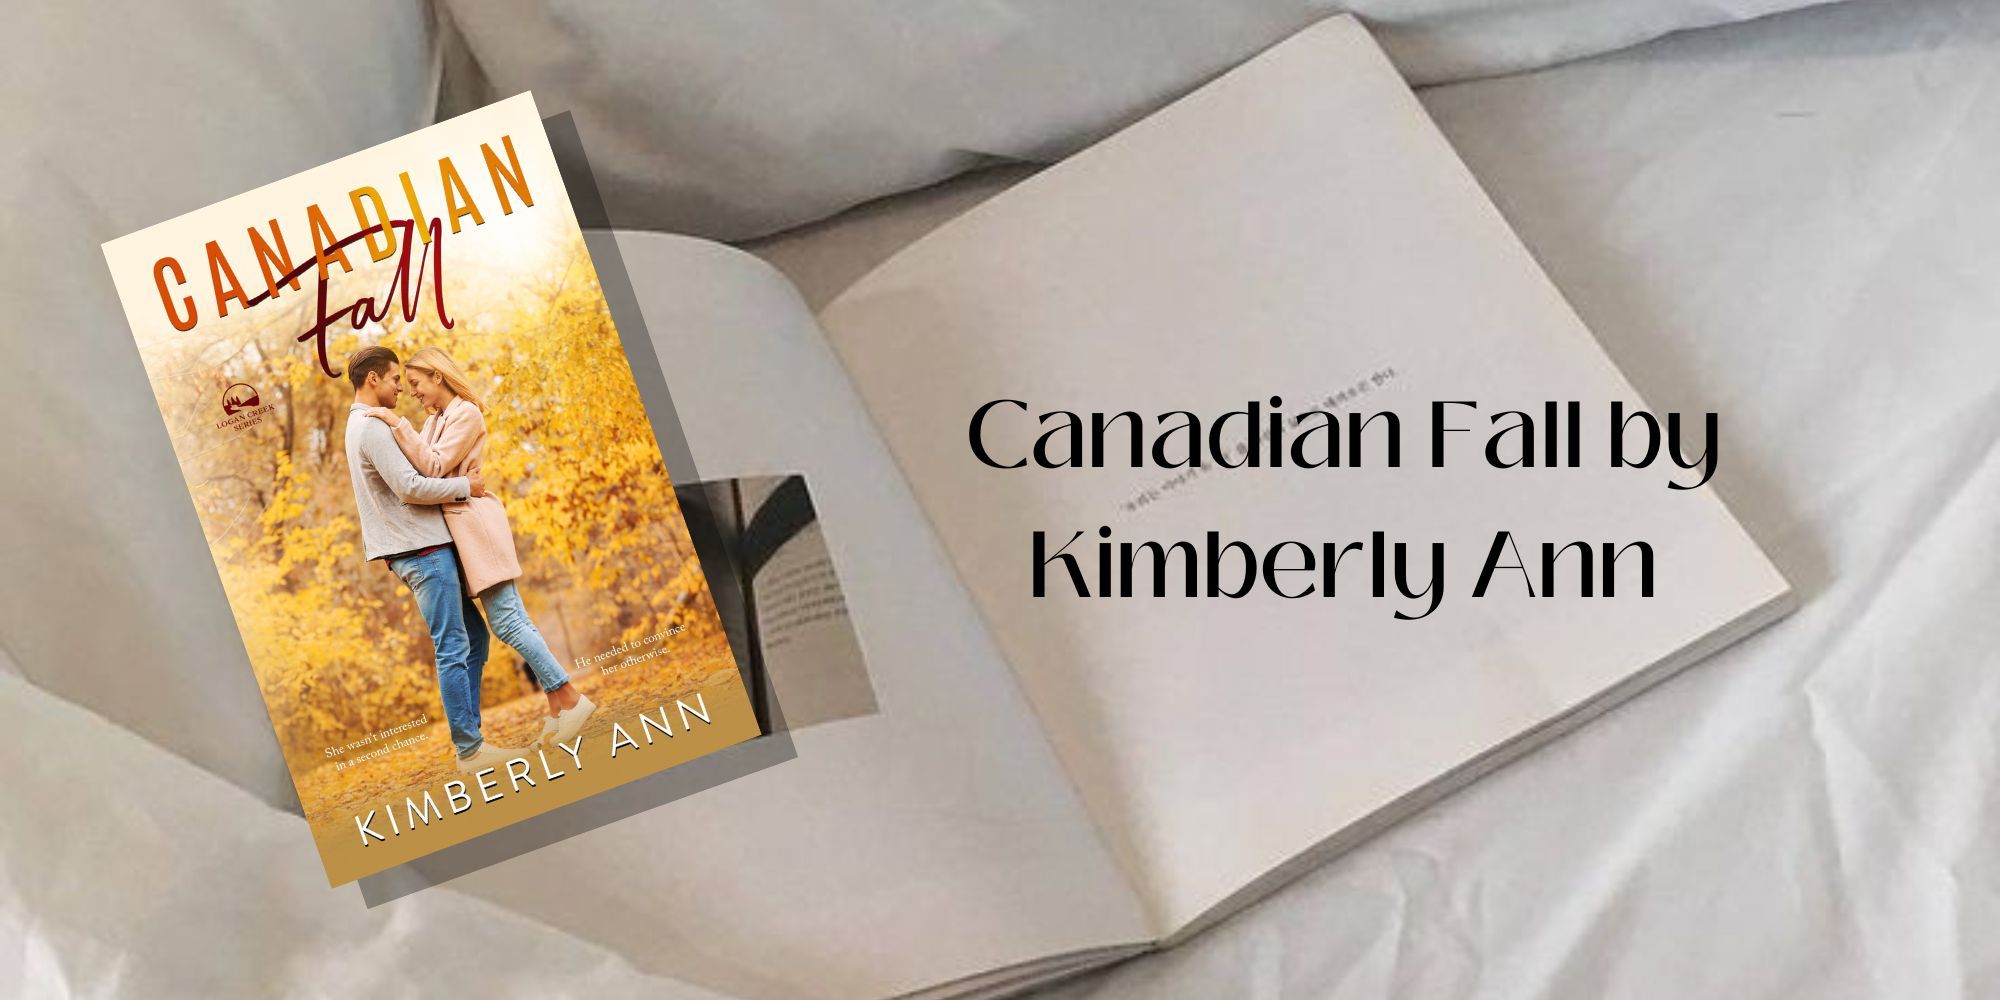 The cover of Canadian Fall by Kimberly Ann